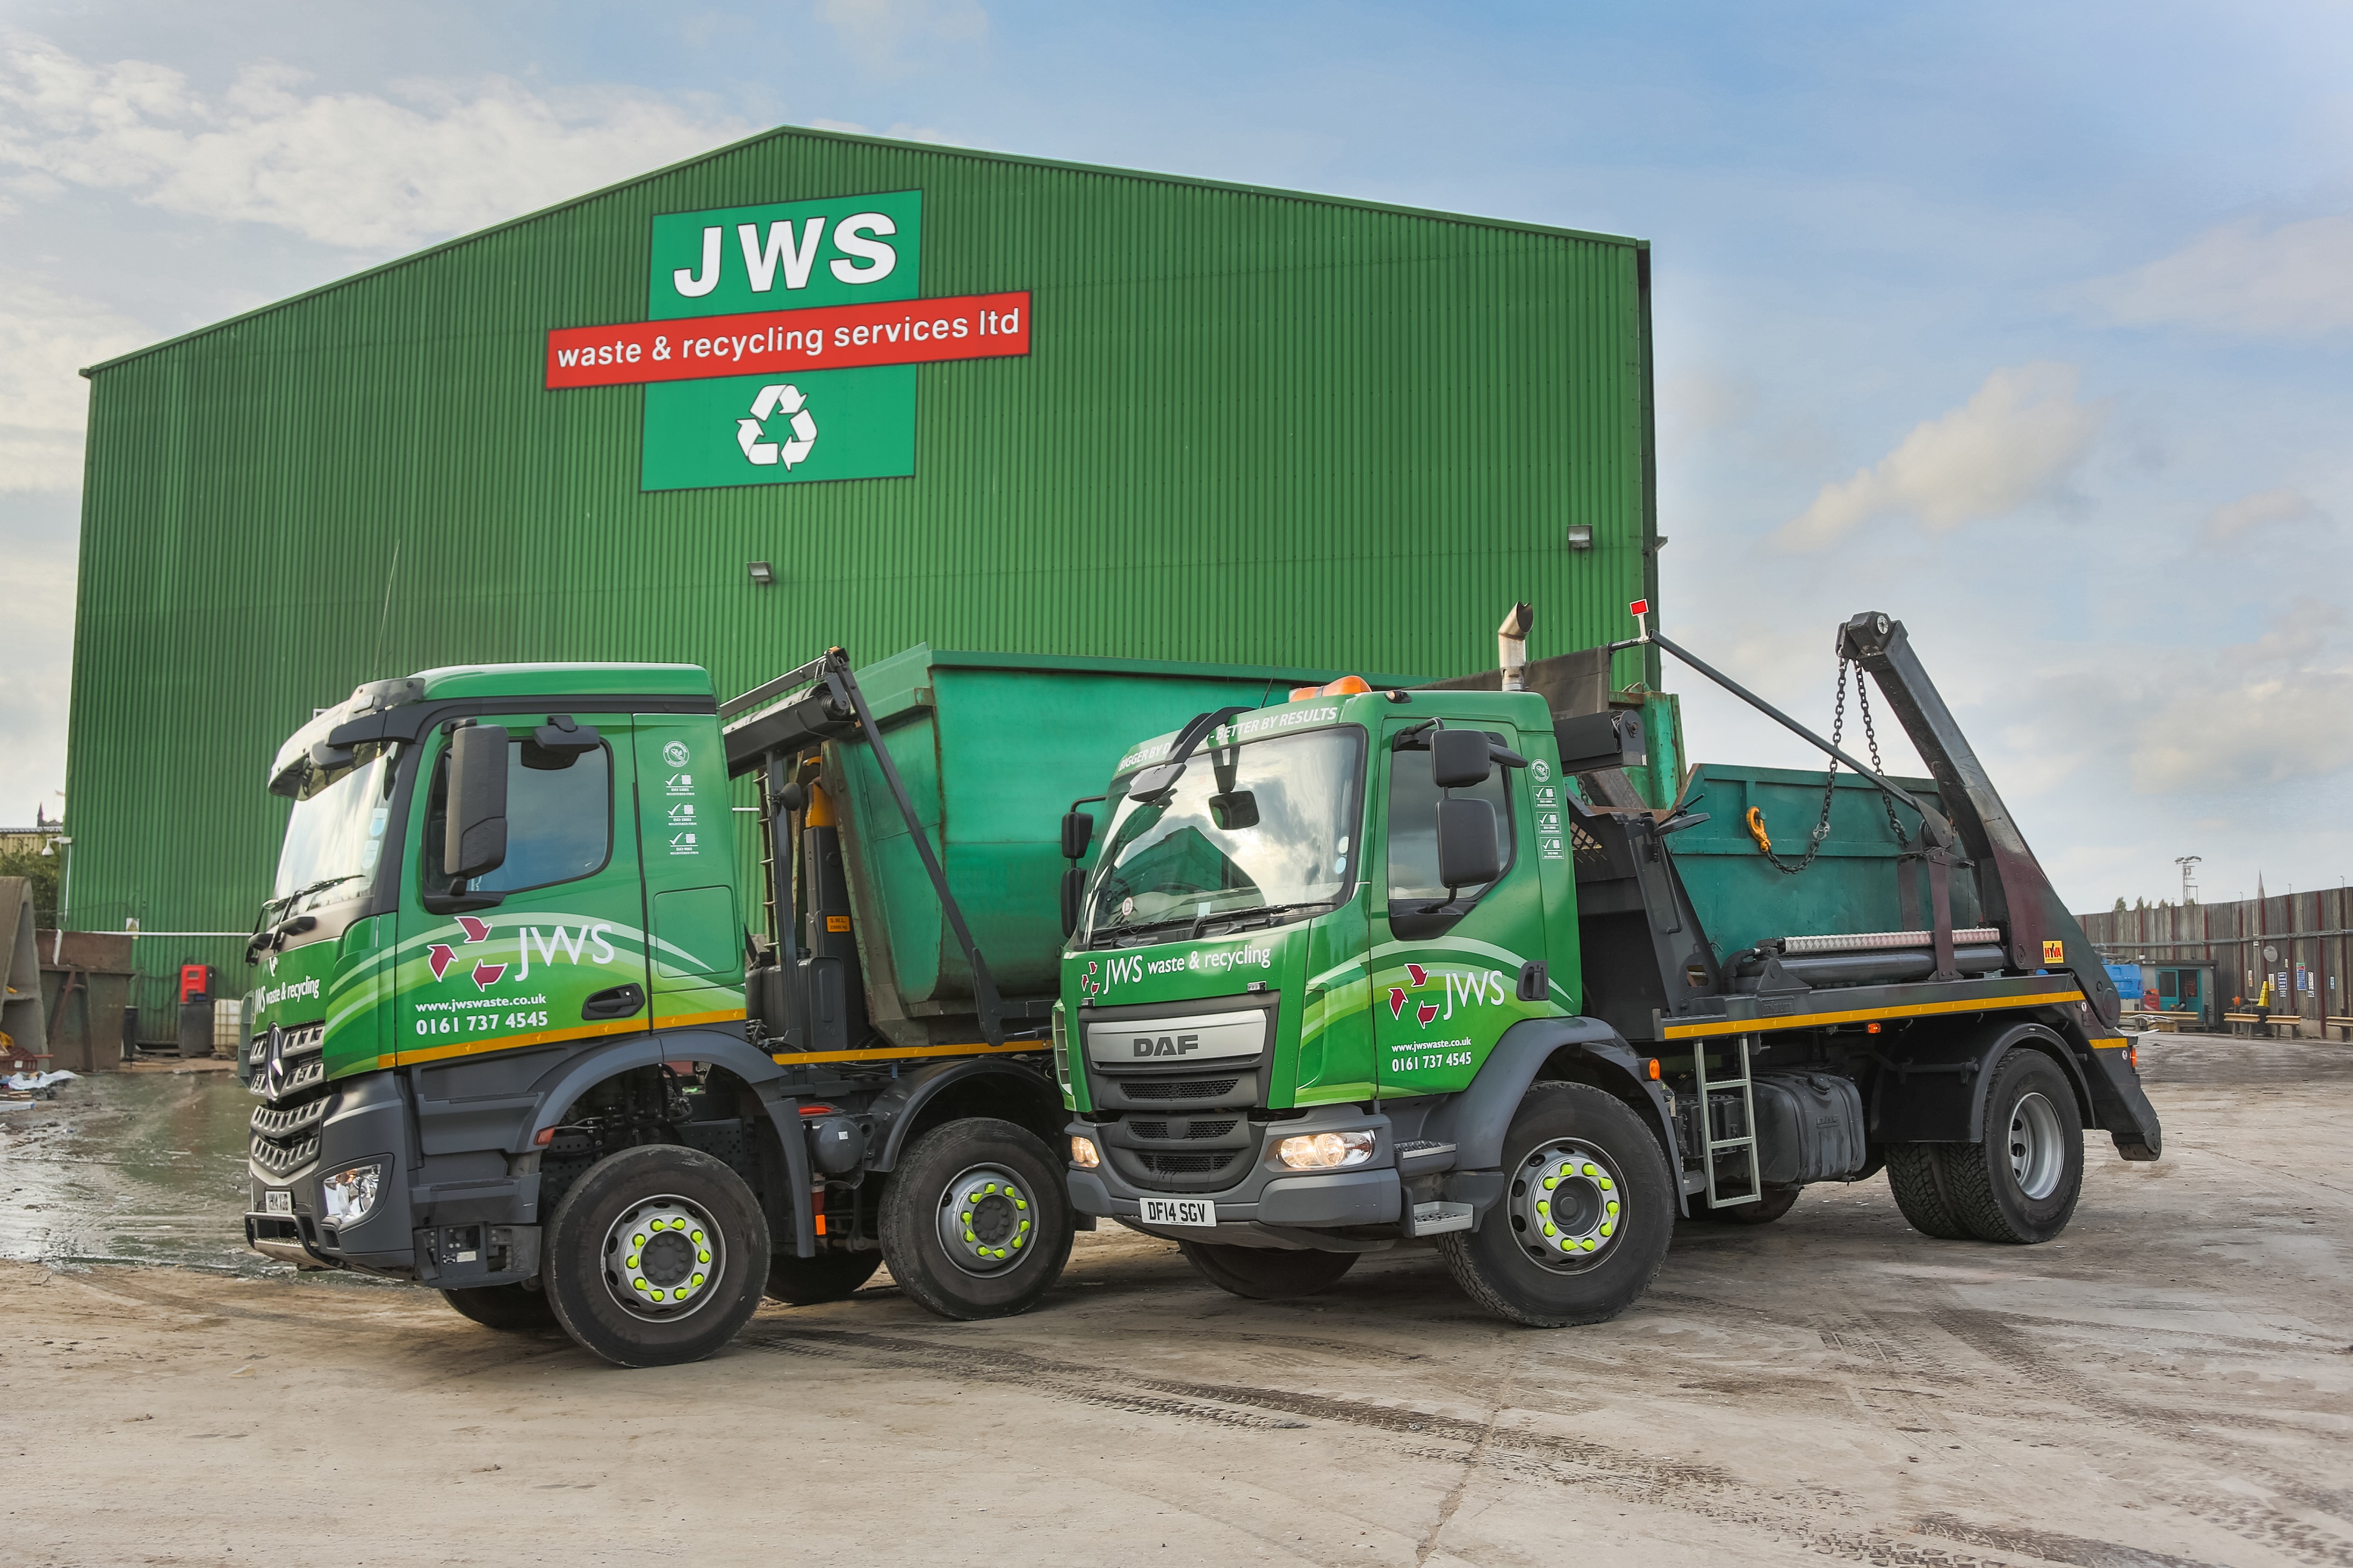 new vehicles to JWS Waste's fleet to improve plant and waste collection efficienty for customers